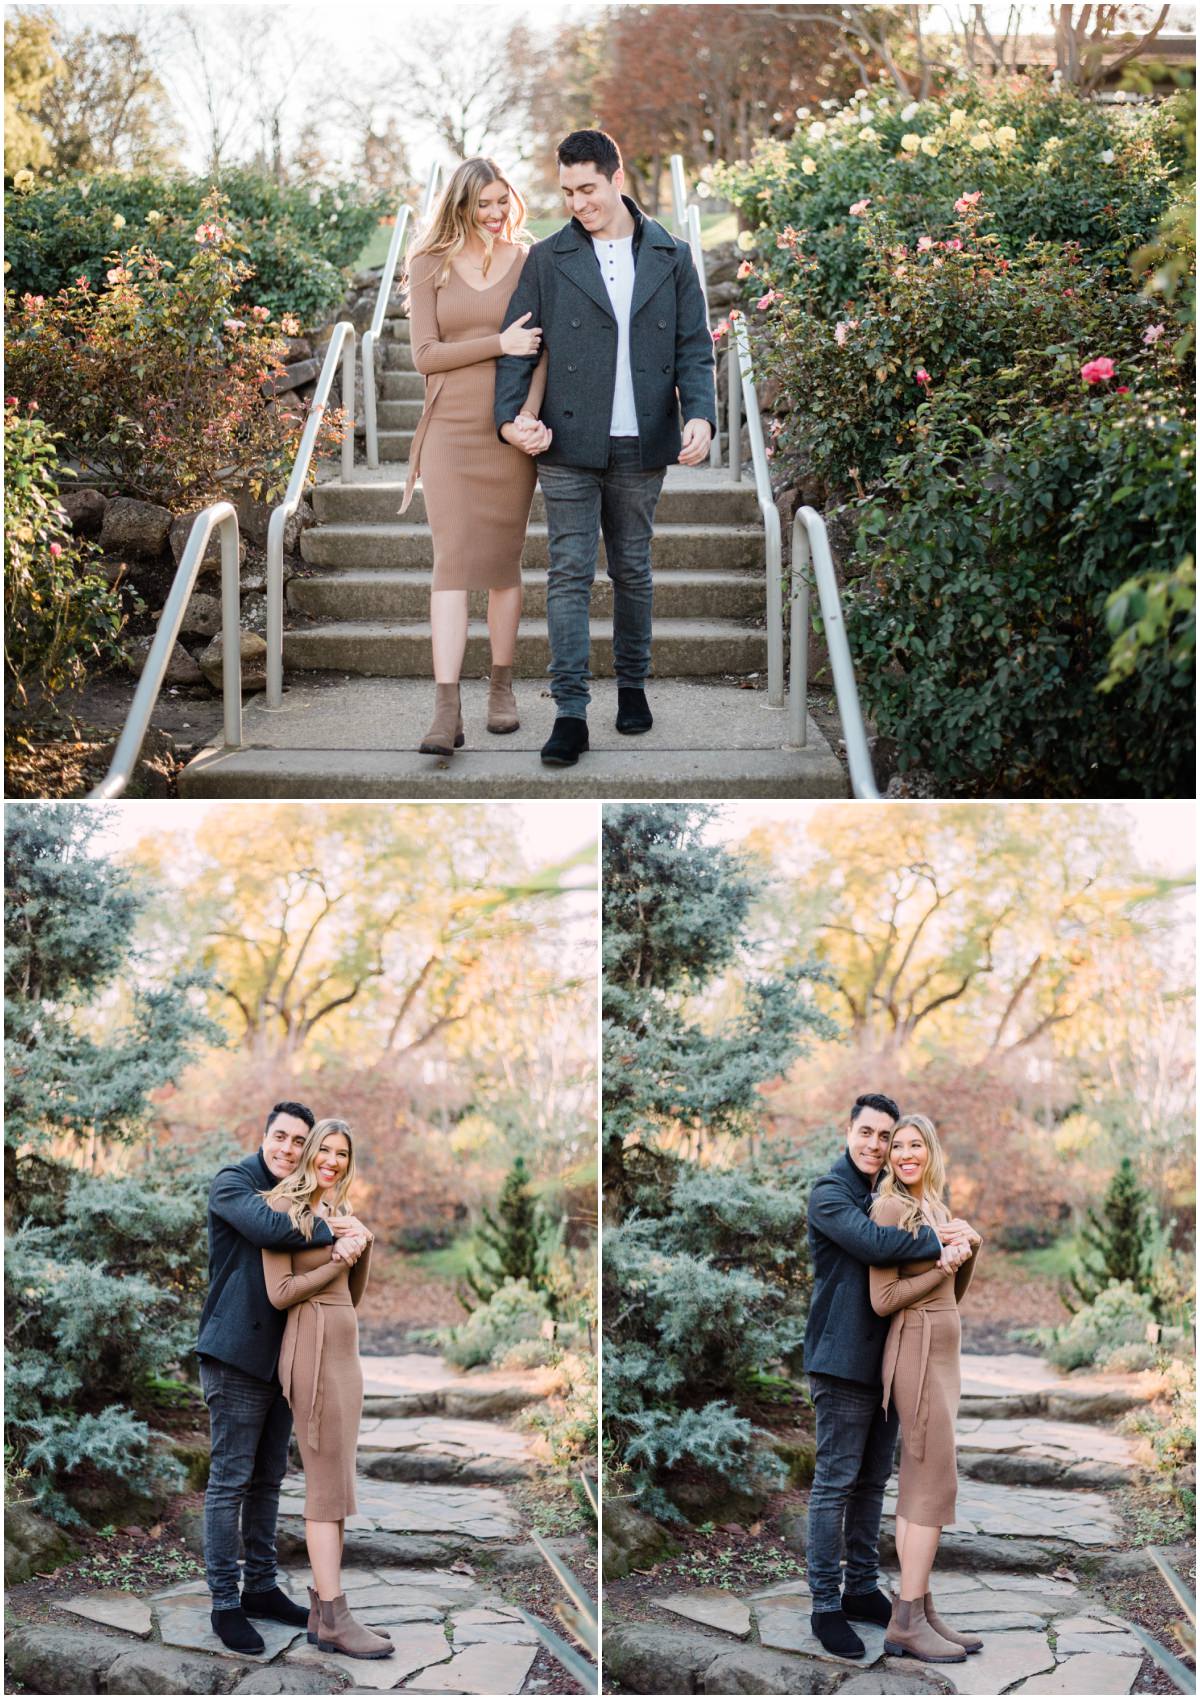 Bay area engagement shoot locations